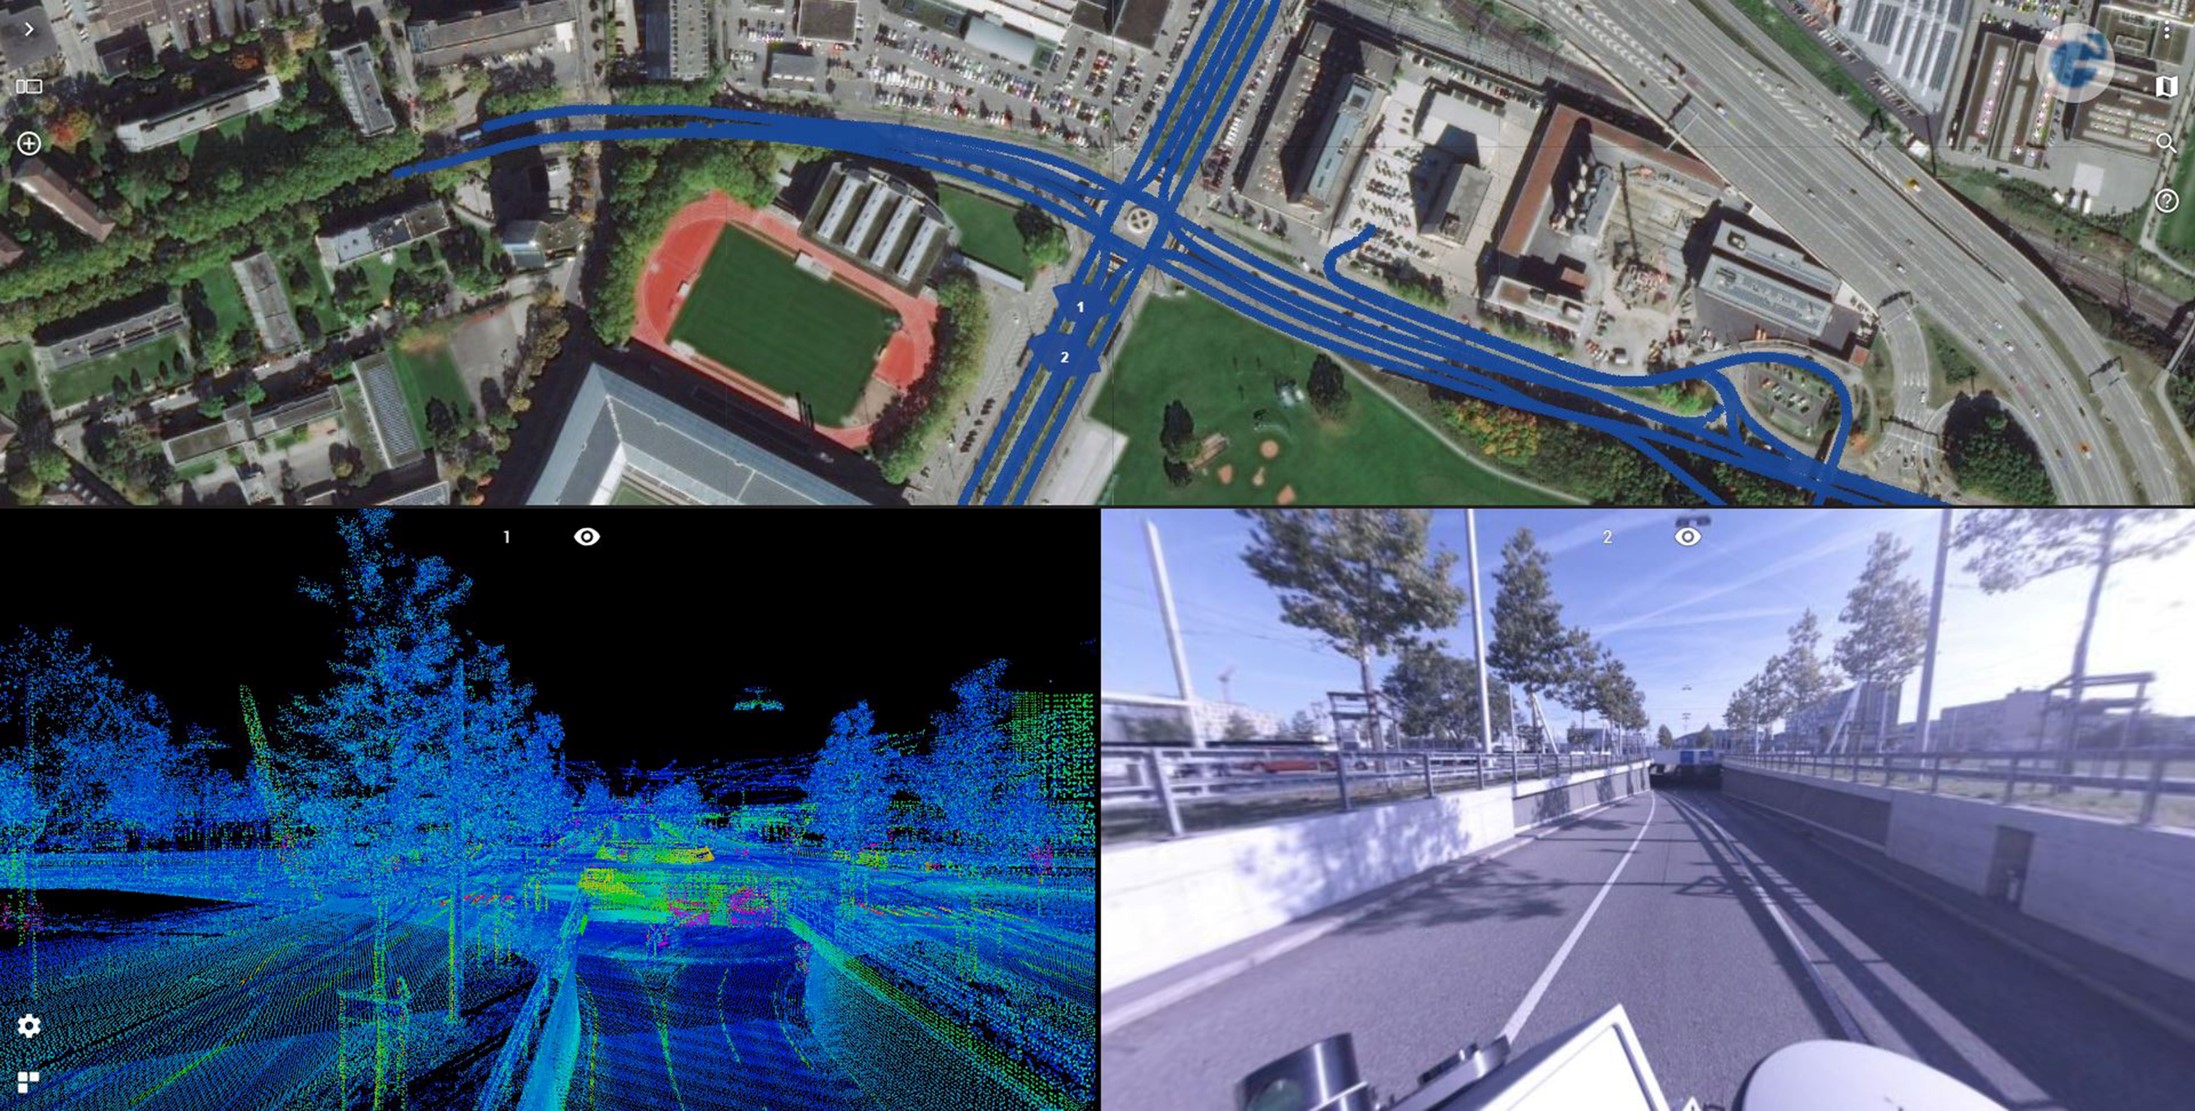 Advanced analyses for departments of transportation using and sharing mobile mapping data